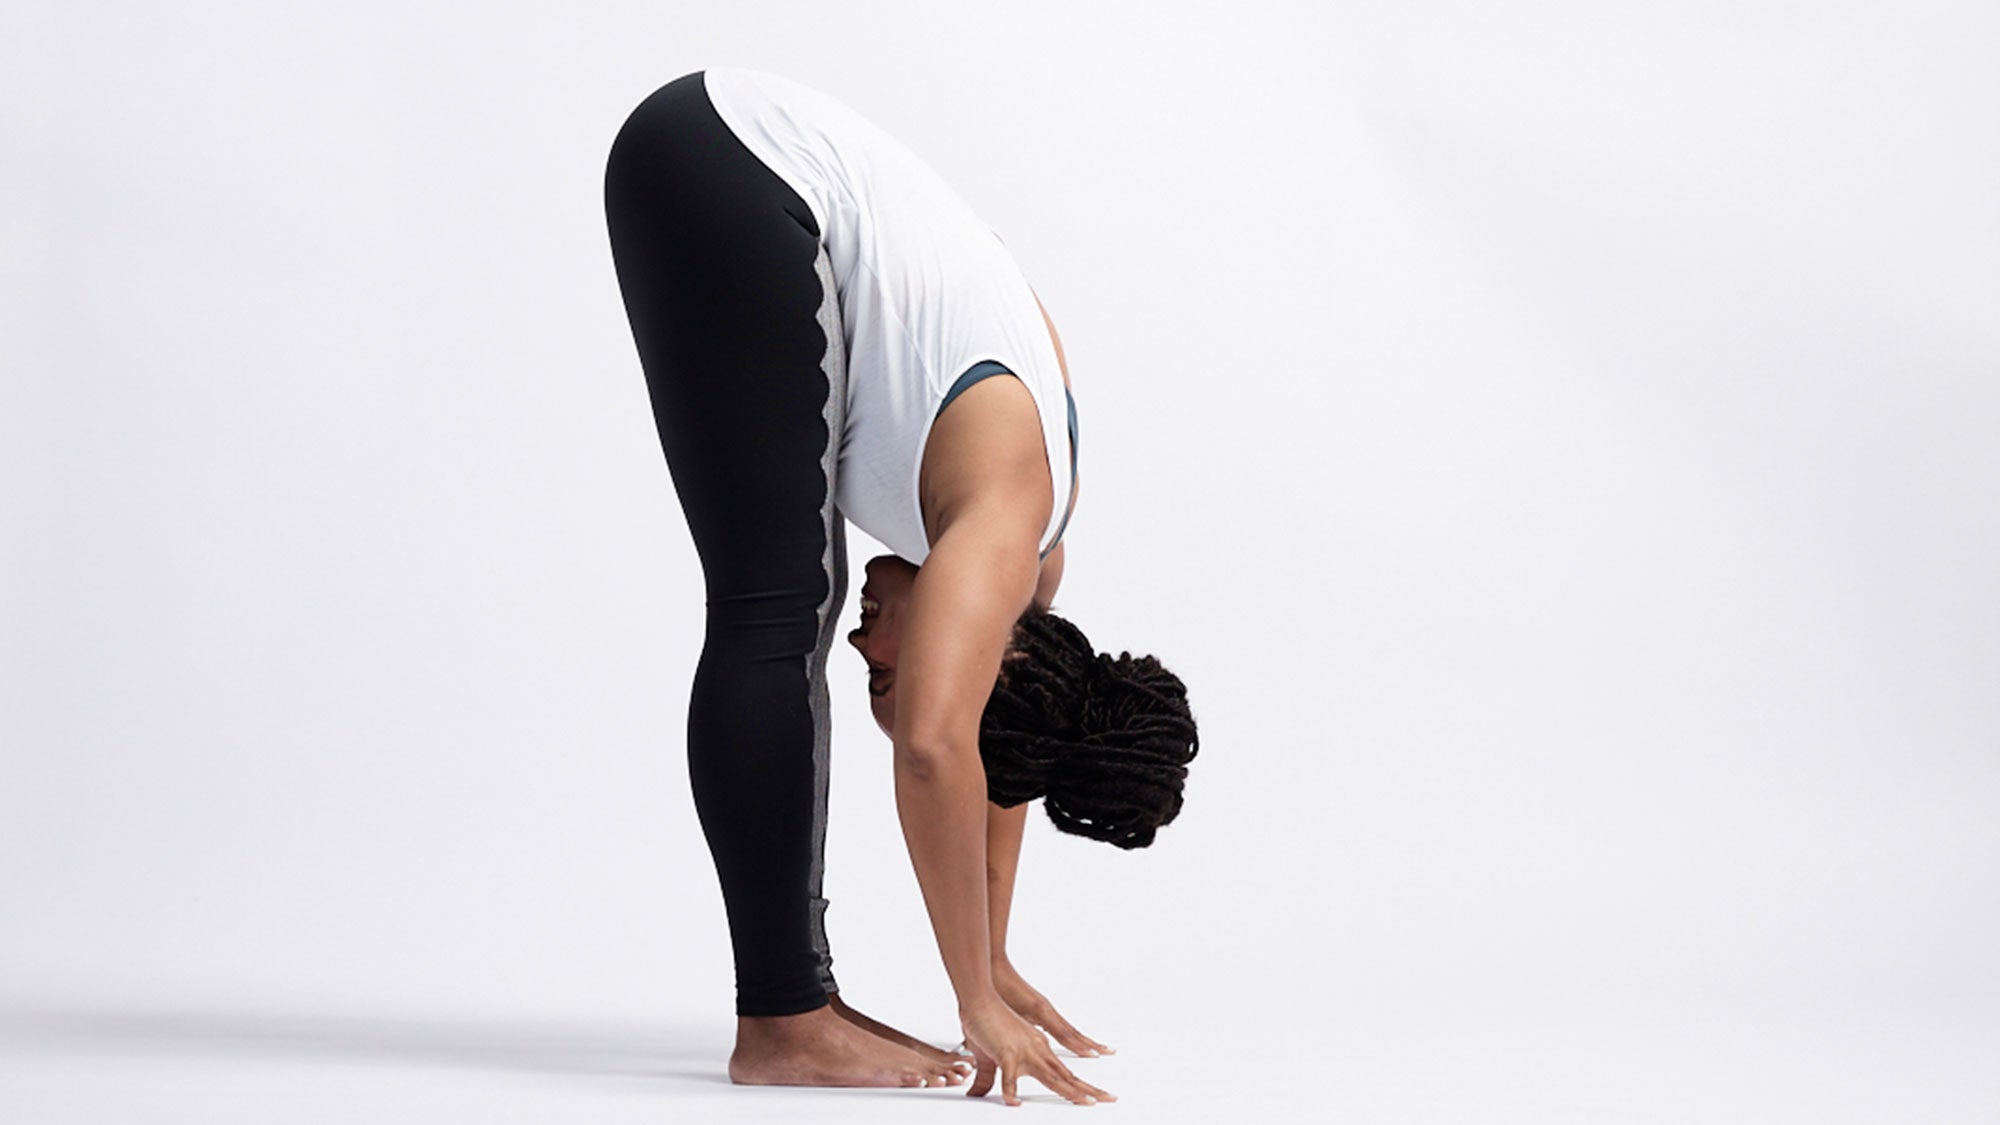 Megha Bisht on LinkedIn: Learn pigeon pose live stress free life Join  online Classes Yoga with…